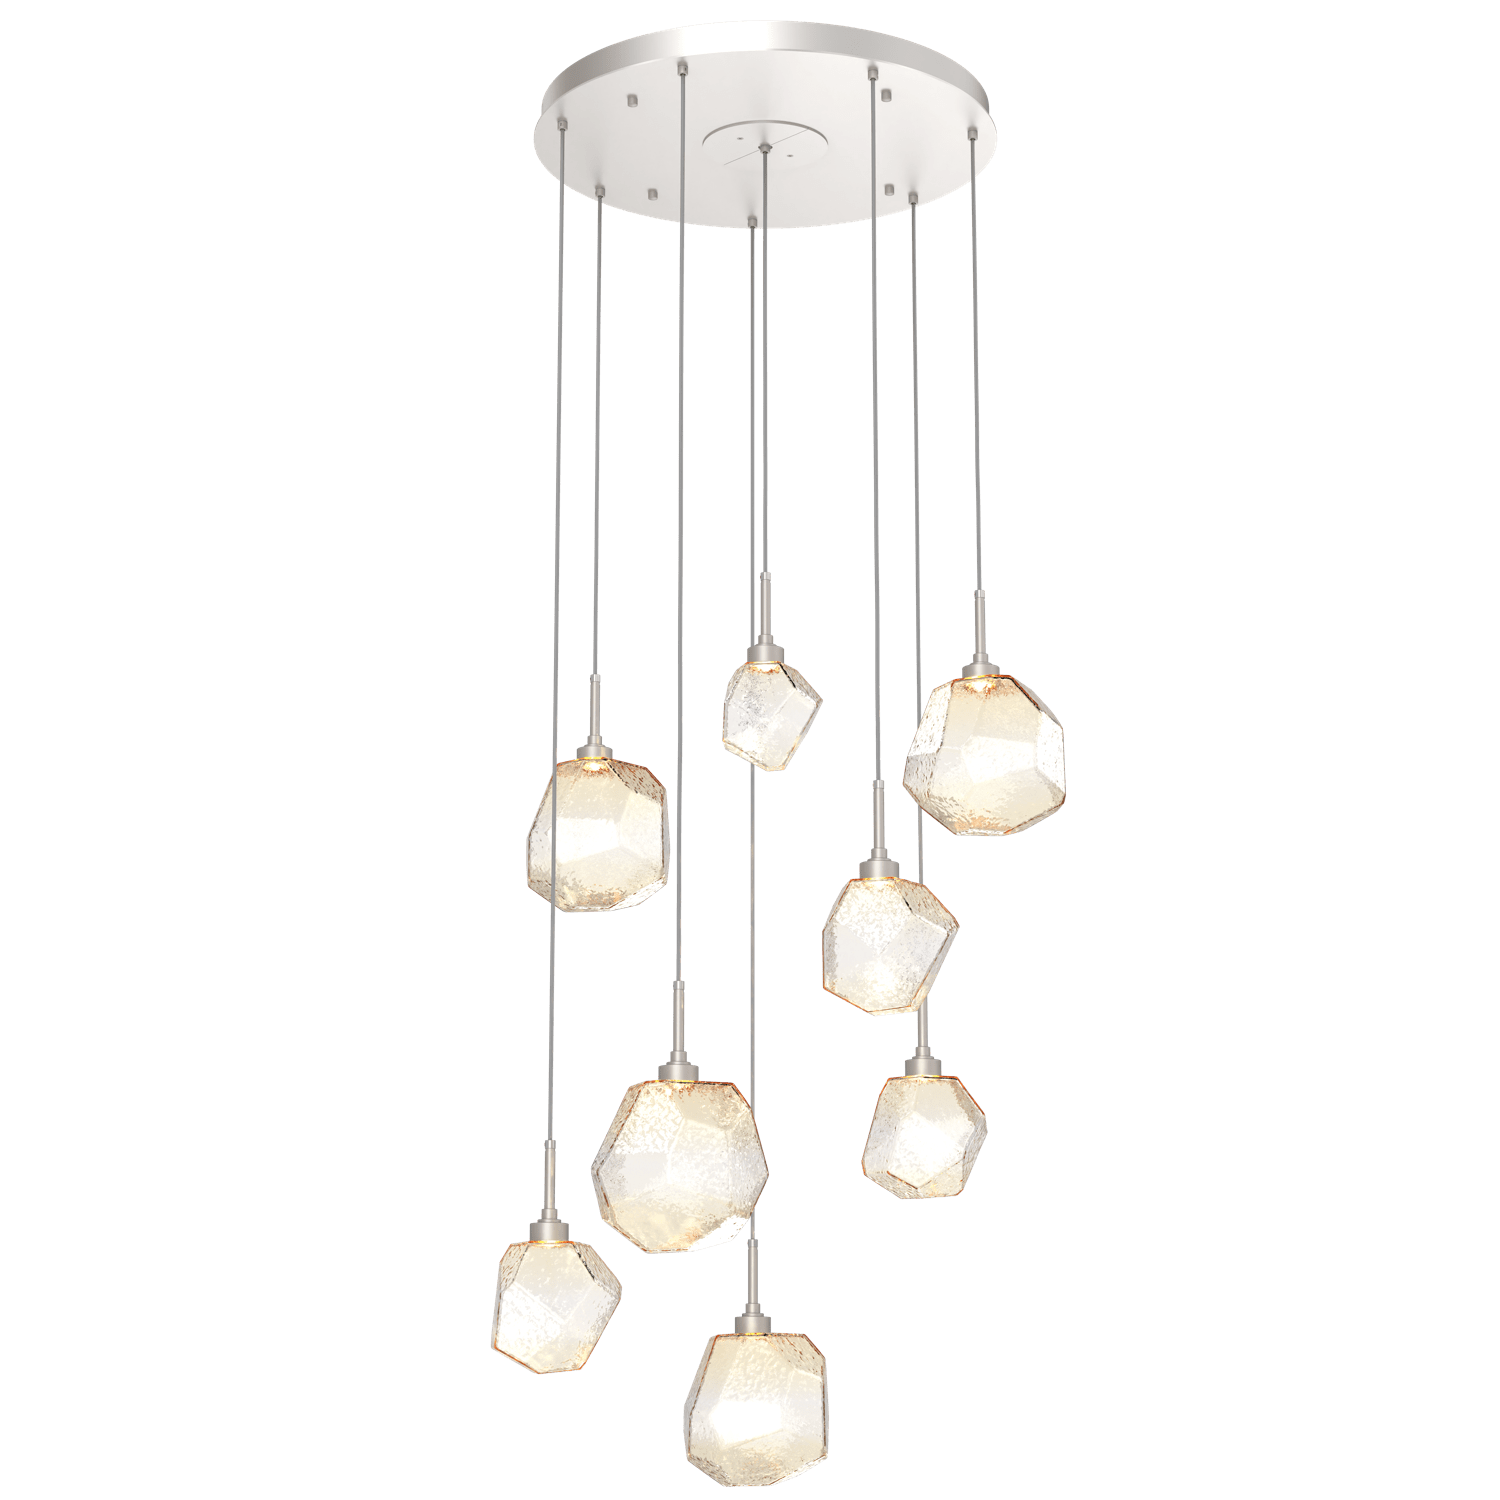 CHB0039-08-BS-A-Hammerton-Studio-Gem-8-light-round-pendant-chandelier-with-metallic-beige-silver-finish-and-amber-blown-glass-shades-and-LED-lamping